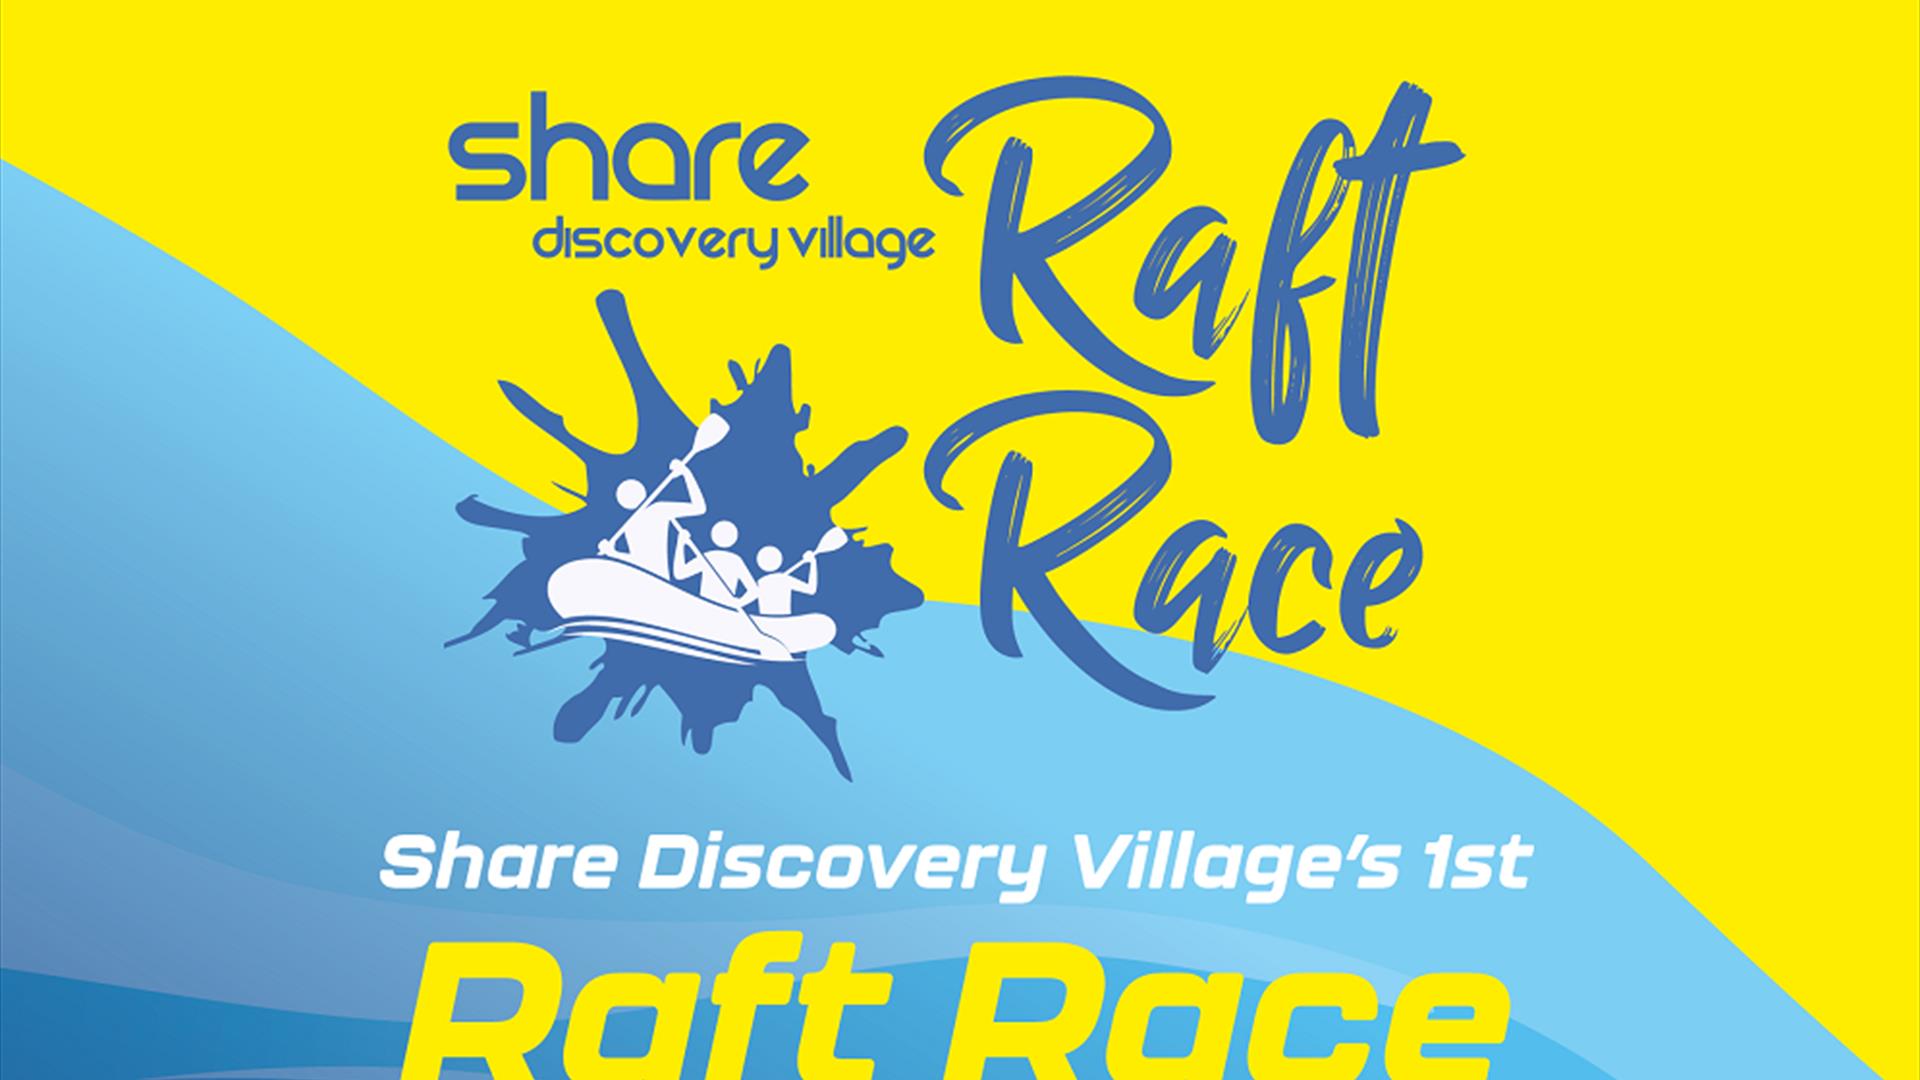 Share Discovery Village Raft Race